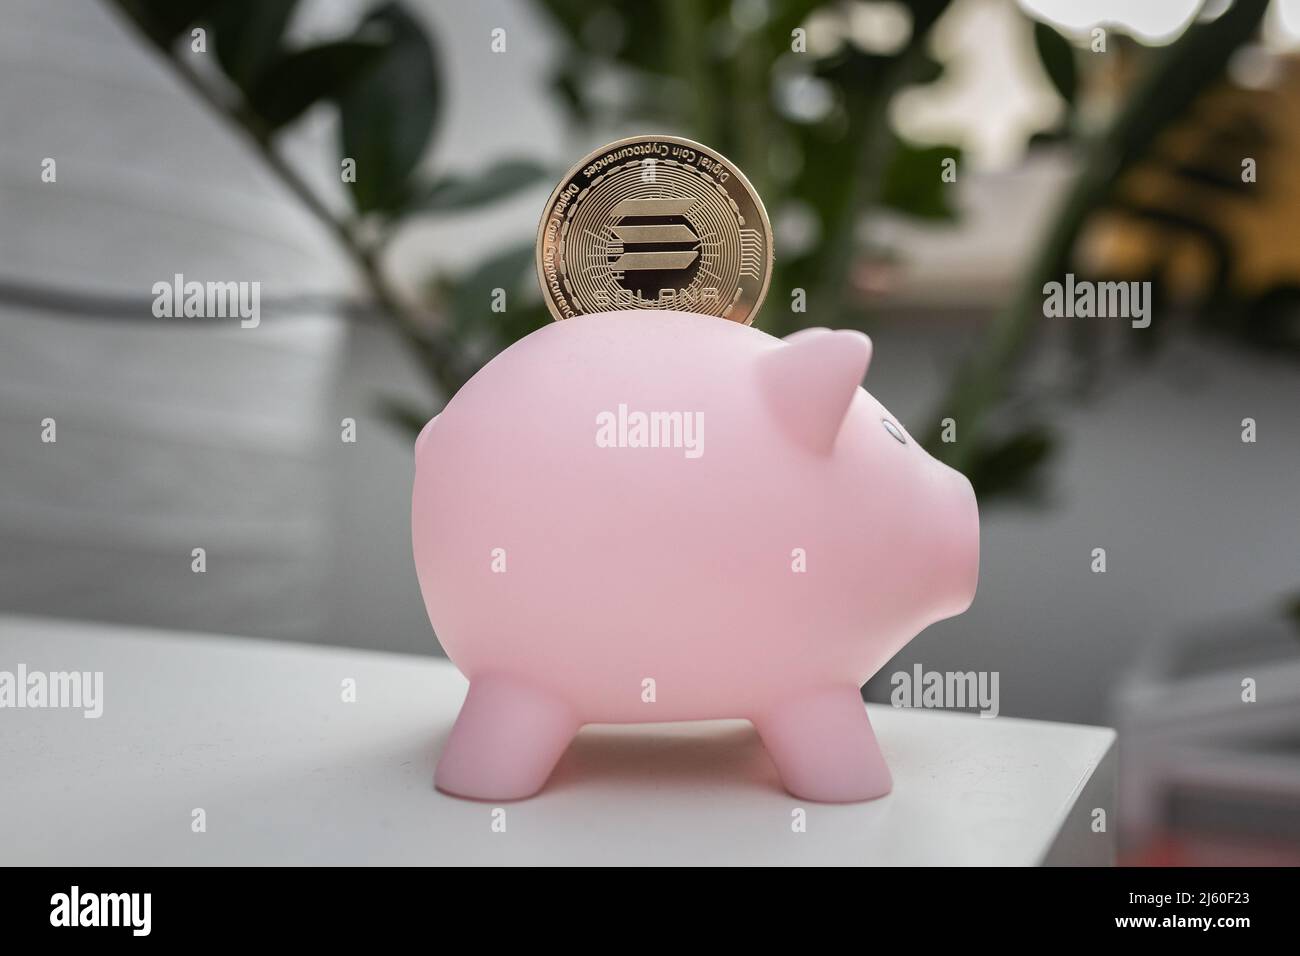 Solana SOL cryptocurrency physical coin in a piggy bank. Stock Photo